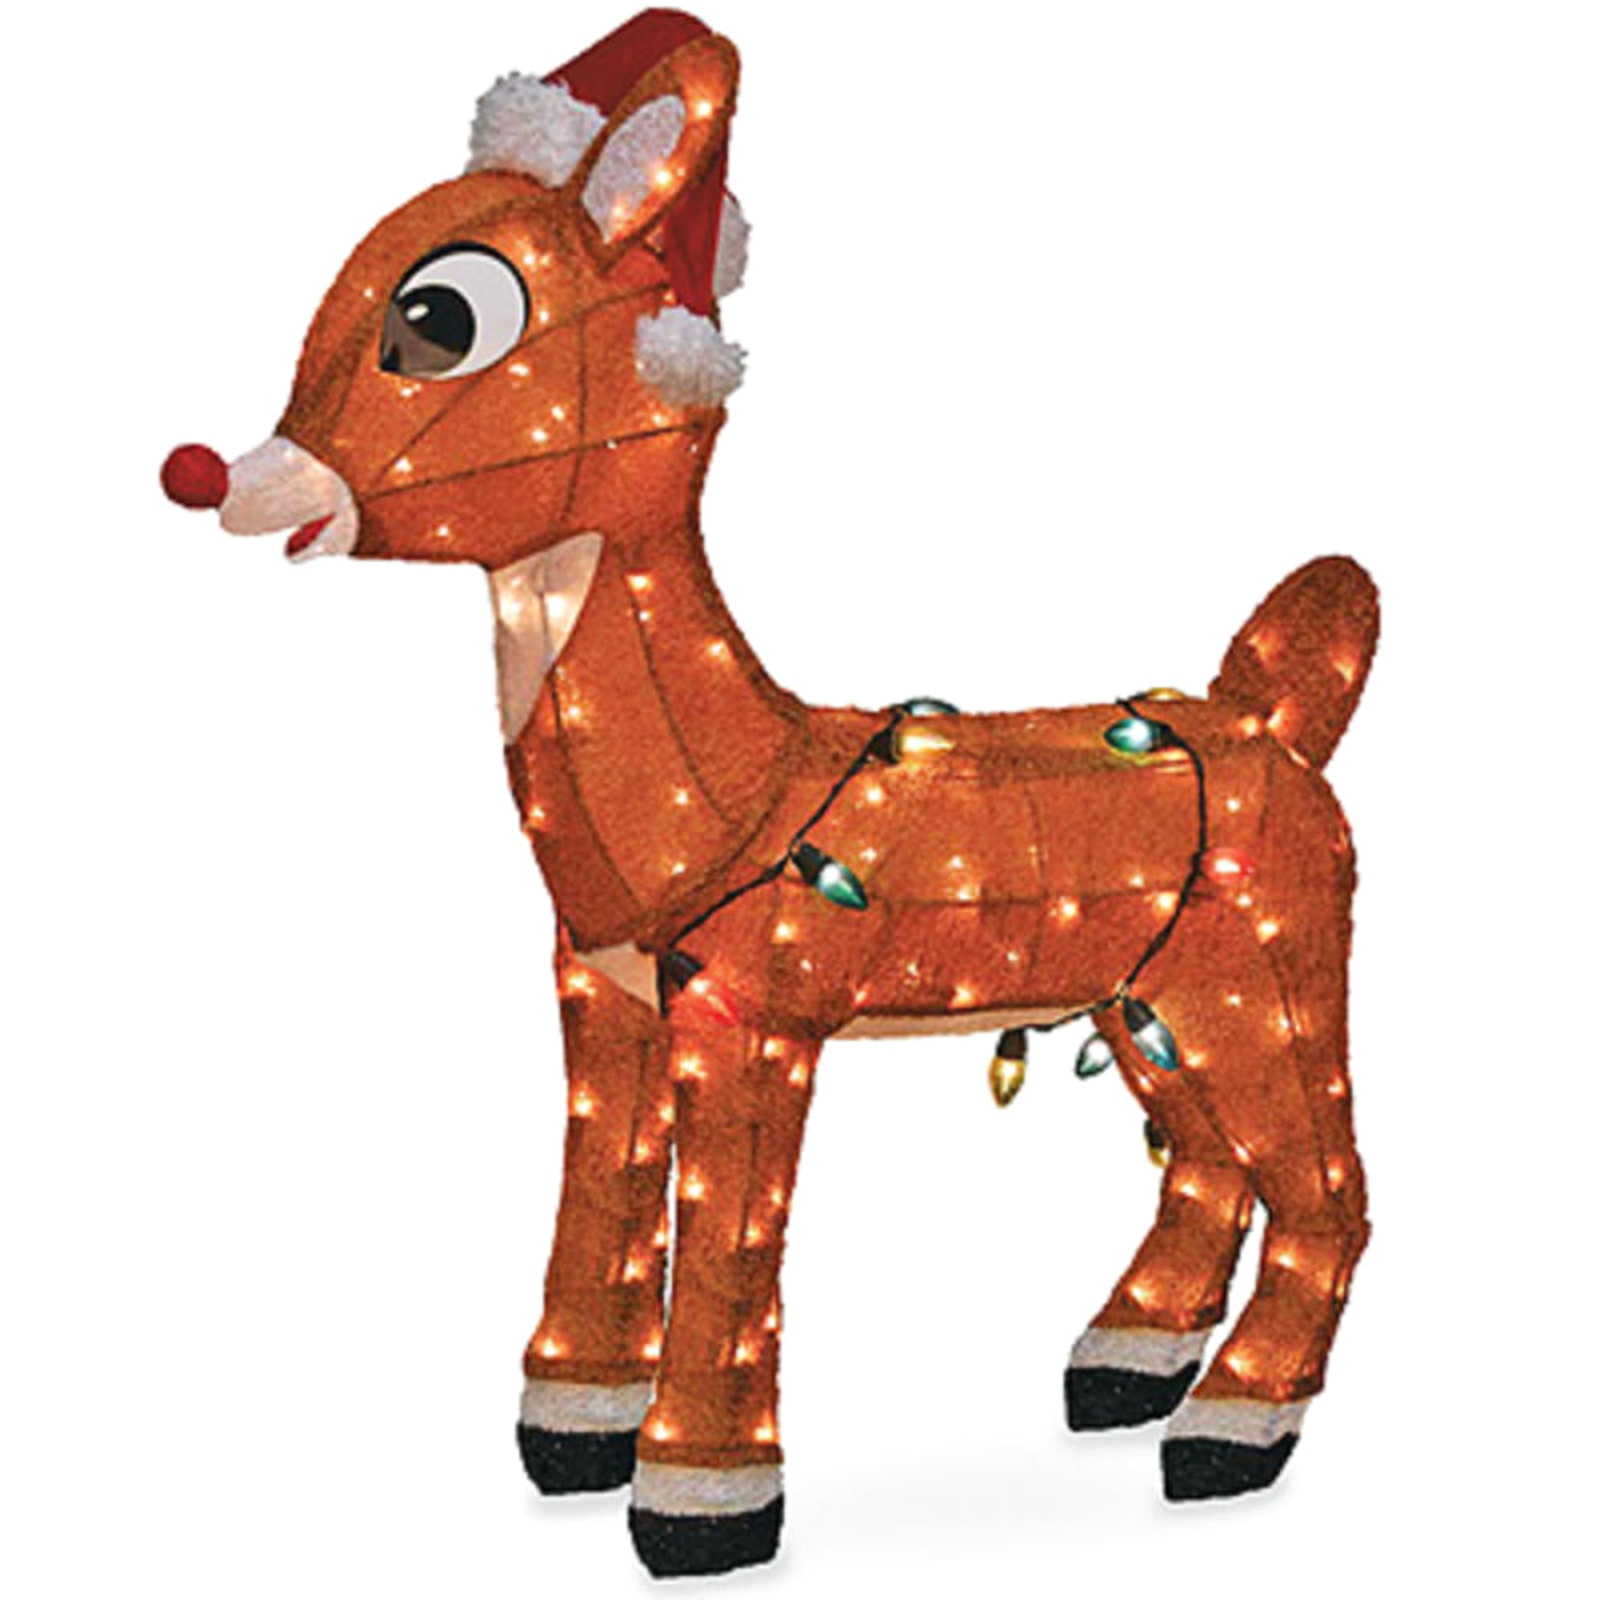 PRODUCT WORKS 36" 3D Lit Rudolph Outdoor Decoration